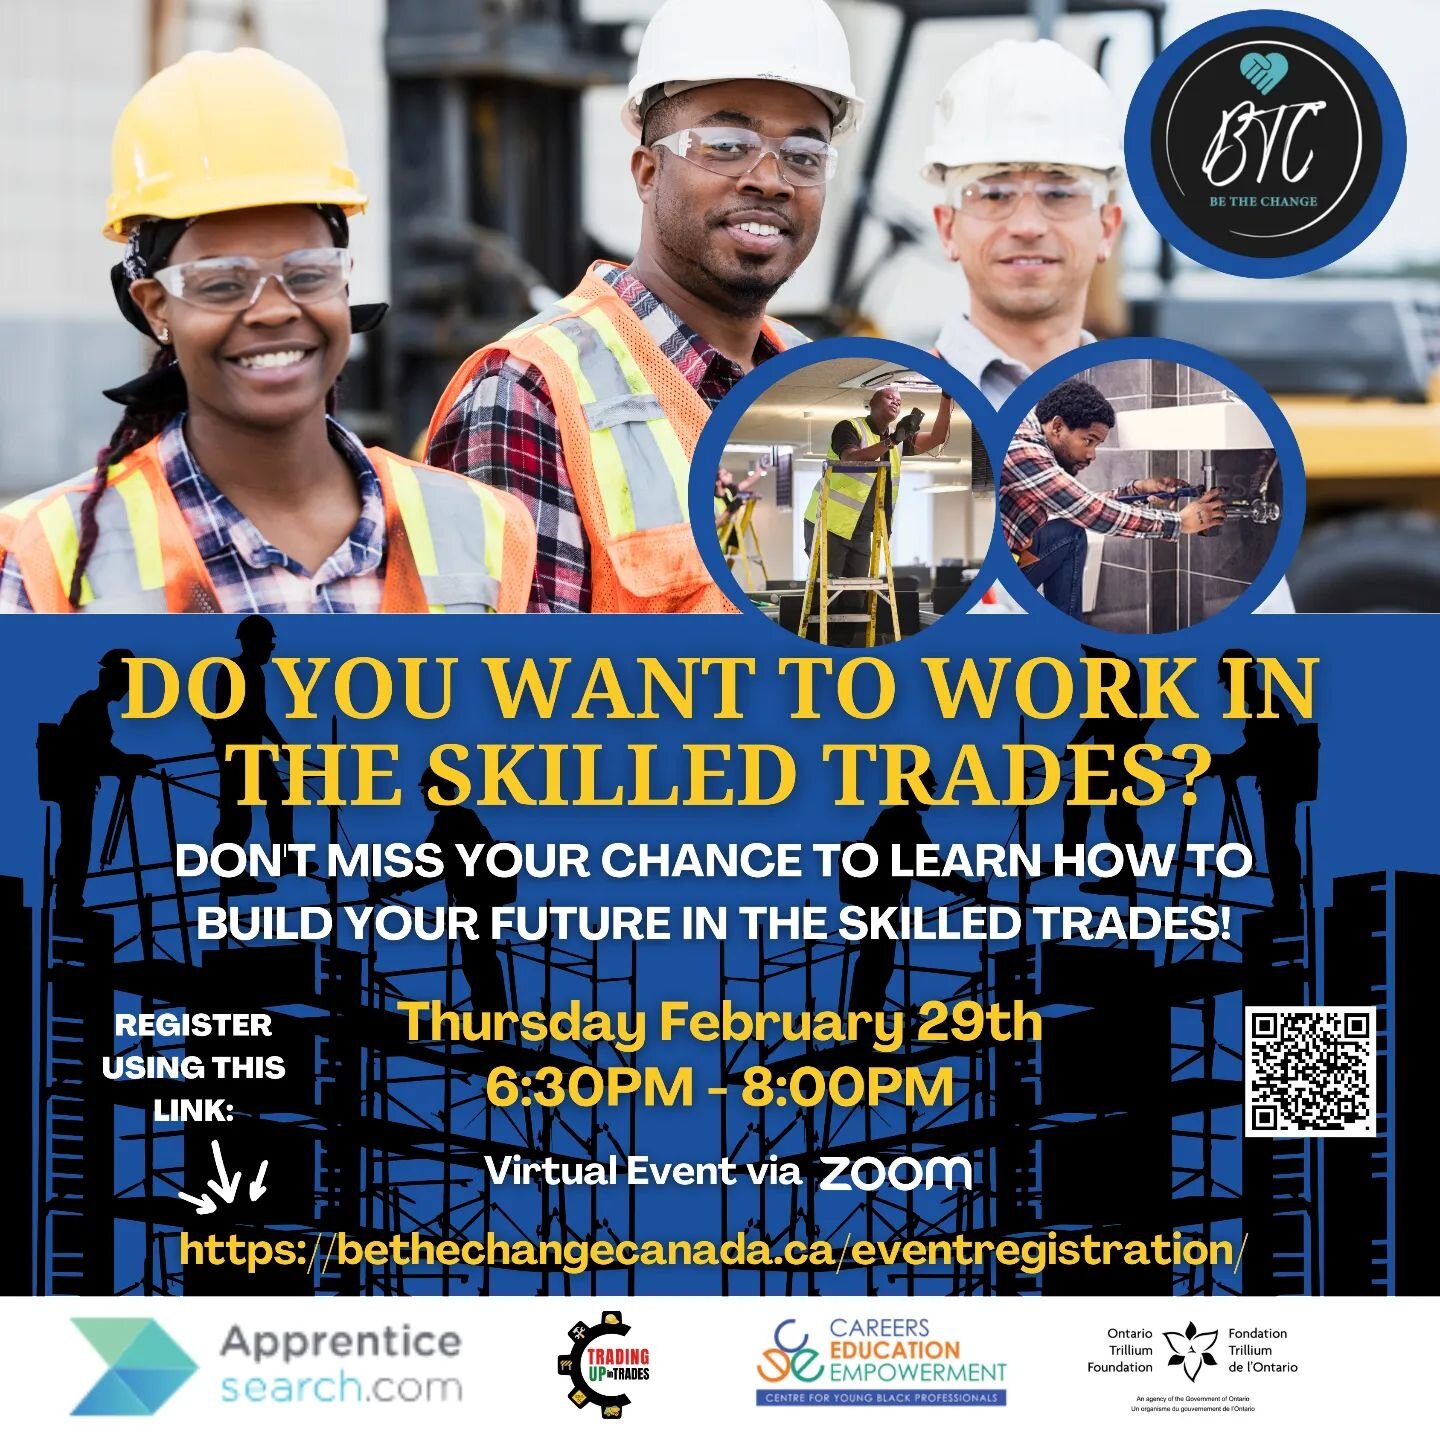 Join us TOMORROW with @apprenticesearch&nbsp;@bethechangepeel and our very own @camwalwyn - Skilled Trade pros to explore the&nbsp;many opportunities the Skilled Trades has to offer!&nbsp;

🗓️ WHEN: Thursday, February 29&nbsp;
⌚TIME: 6:30PM - 8:00PM